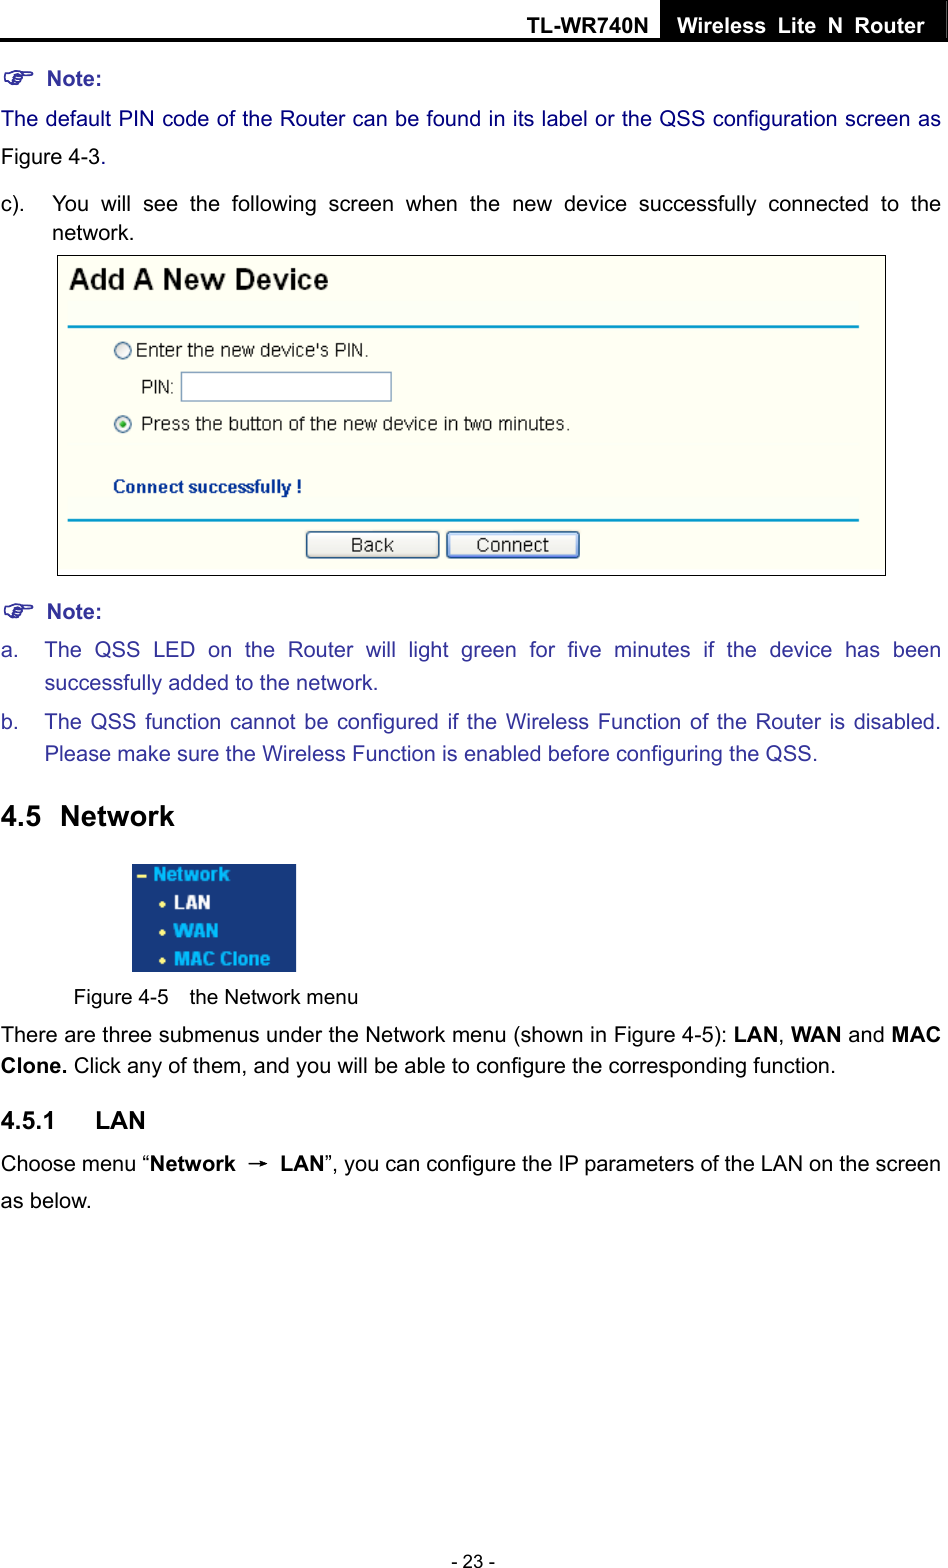 TL-WR740N Wireless Lite N Router  - 23 - ) Note: The default PIN code of the Router can be found in its label or the QSS configuration screen as Figure 4-3. c).  You will see the following screen when the new device successfully connected to the network.  ) Note: a.  The QSS LED on the Router will light green for five minutes if the device has been successfully added to the network. b.  The QSS function cannot be configured if the Wireless Function of the Router is disabled. Please make sure the Wireless Function is enabled before configuring the QSS. 4.5  Network  Figure 4-5  the Network menu There are three submenus under the Network menu (shown in Figure 4-5): LAN, WAN and MAC Clone. Click any of them, and you will be able to configure the corresponding function.   4.5.1  LAN Choose menu “Network  → LAN”, you can configure the IP parameters of the LAN on the screen as below. 